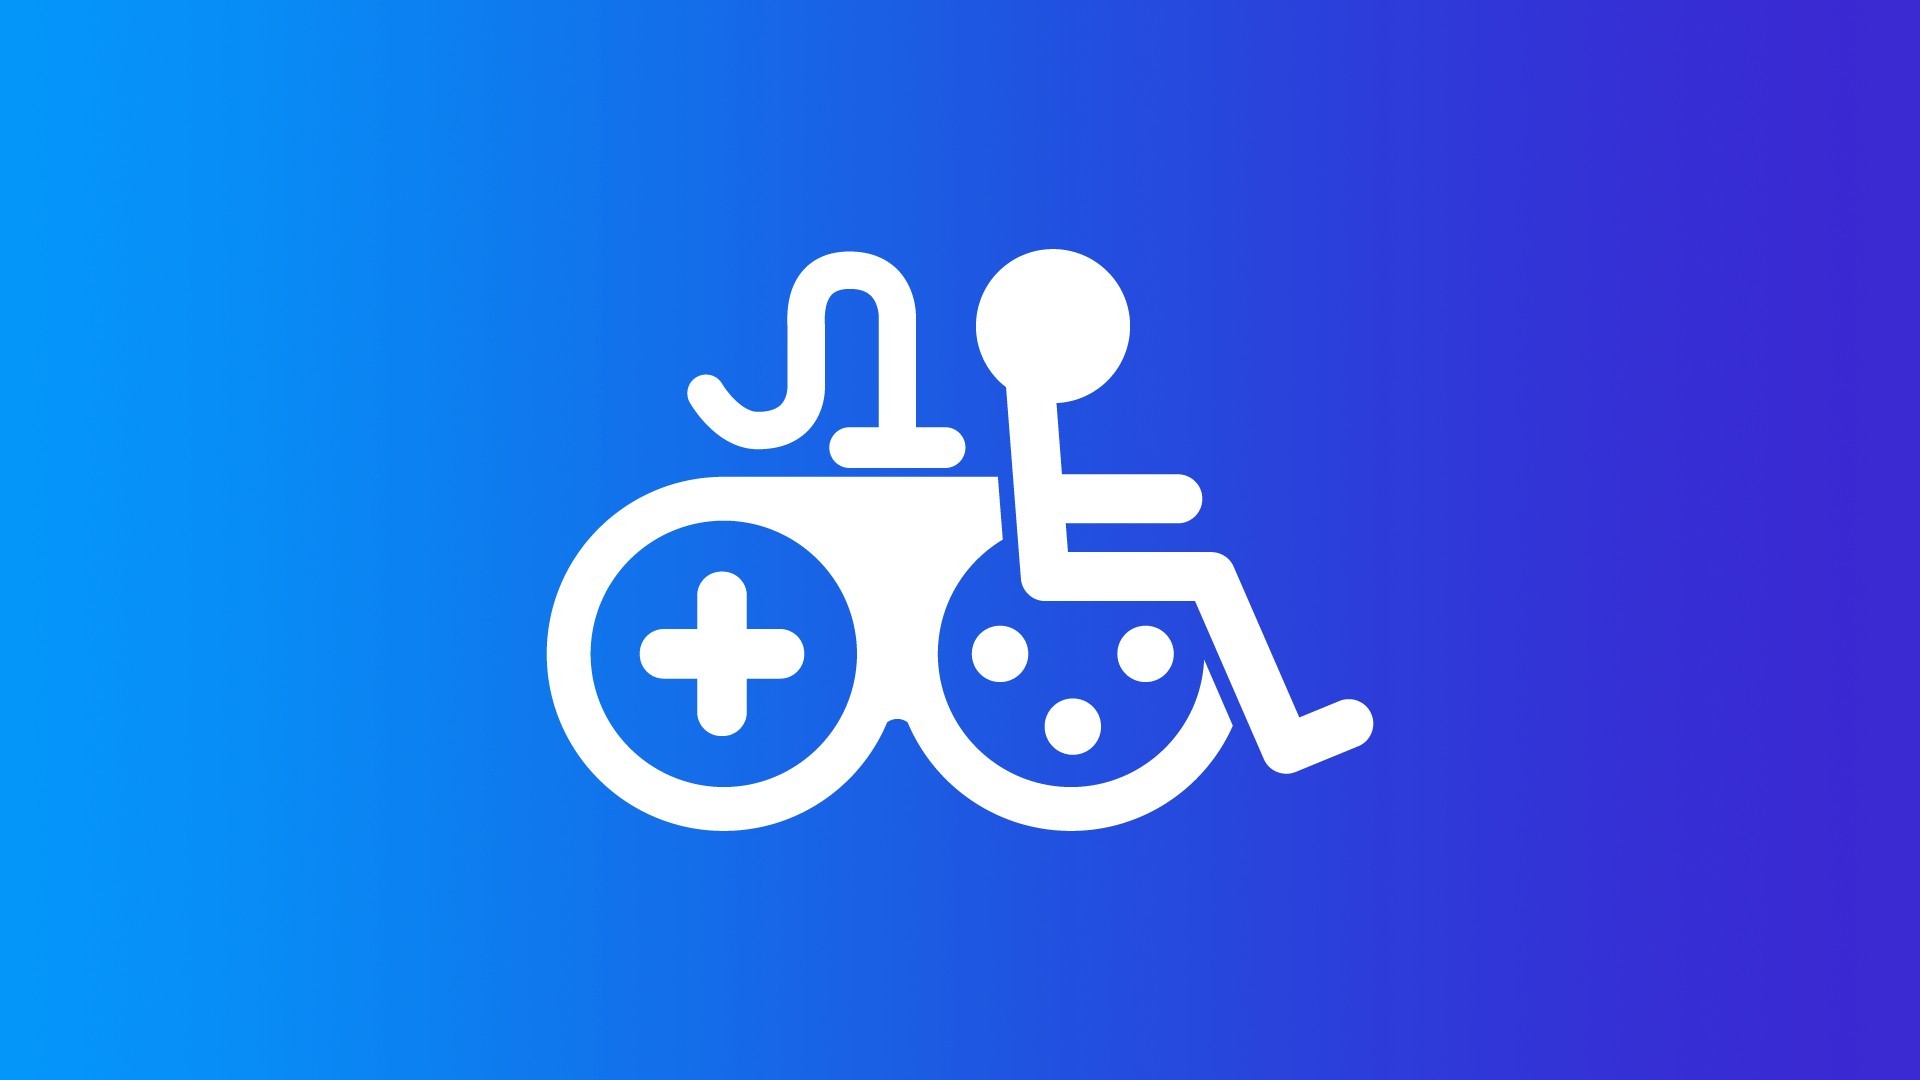 The game accessibility icon, which depicts the disability symbol woven in with a game controller.